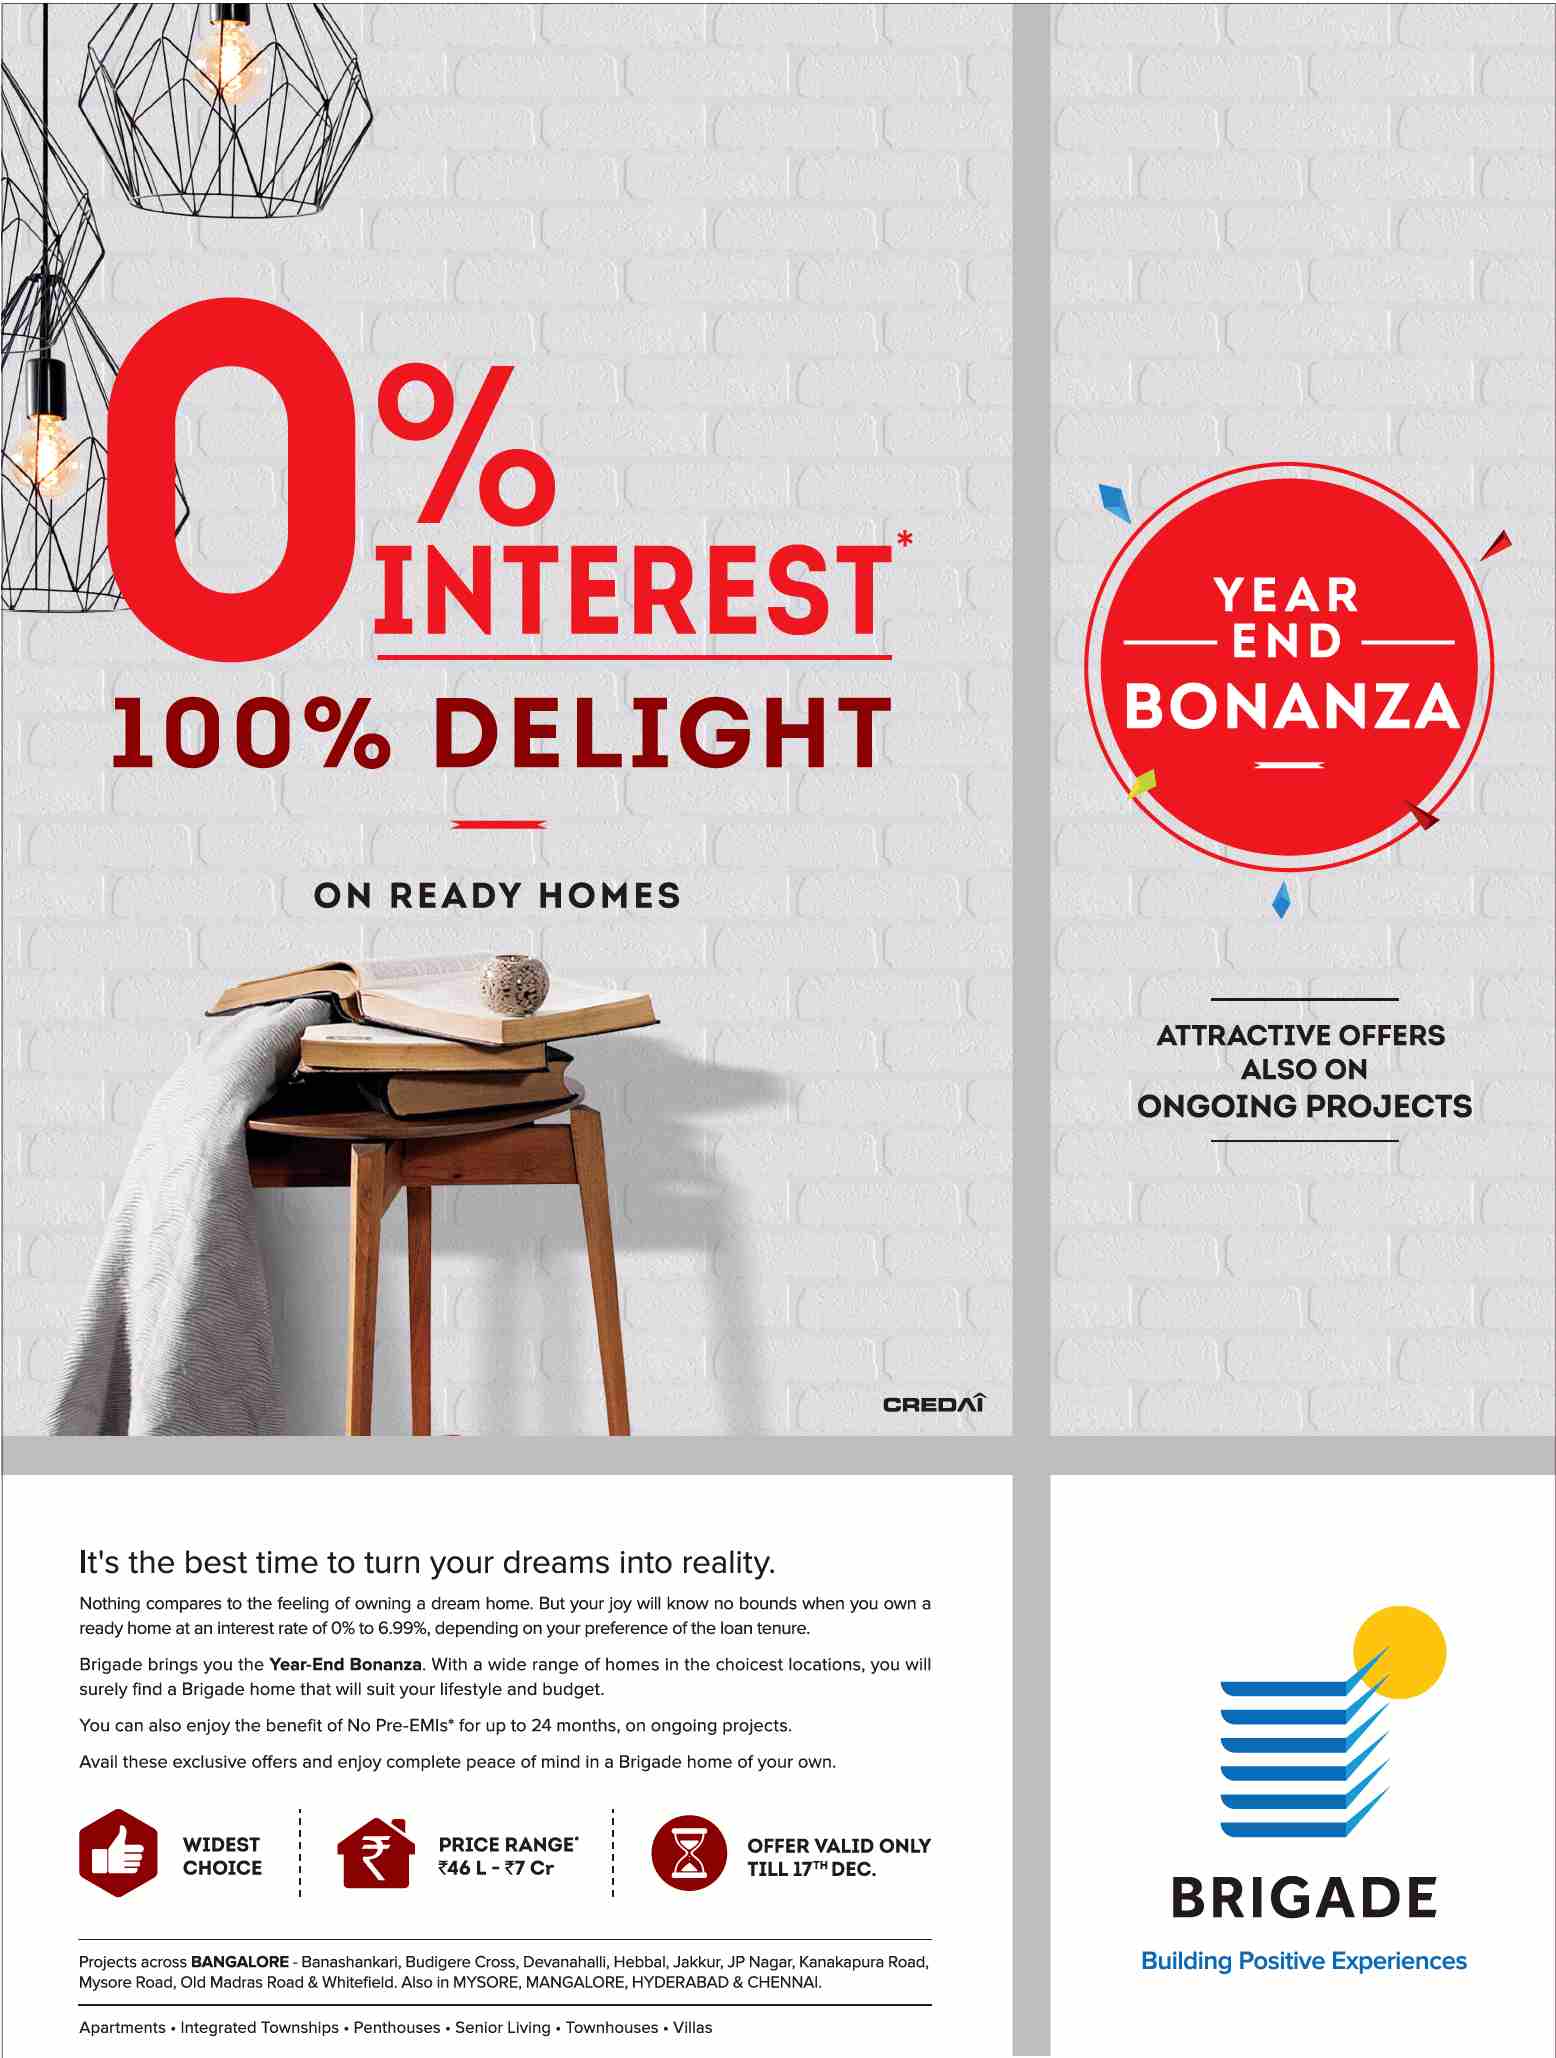 The best time to turn your dreams into reality during Year End Bonanza offer at Brigade Properties Update